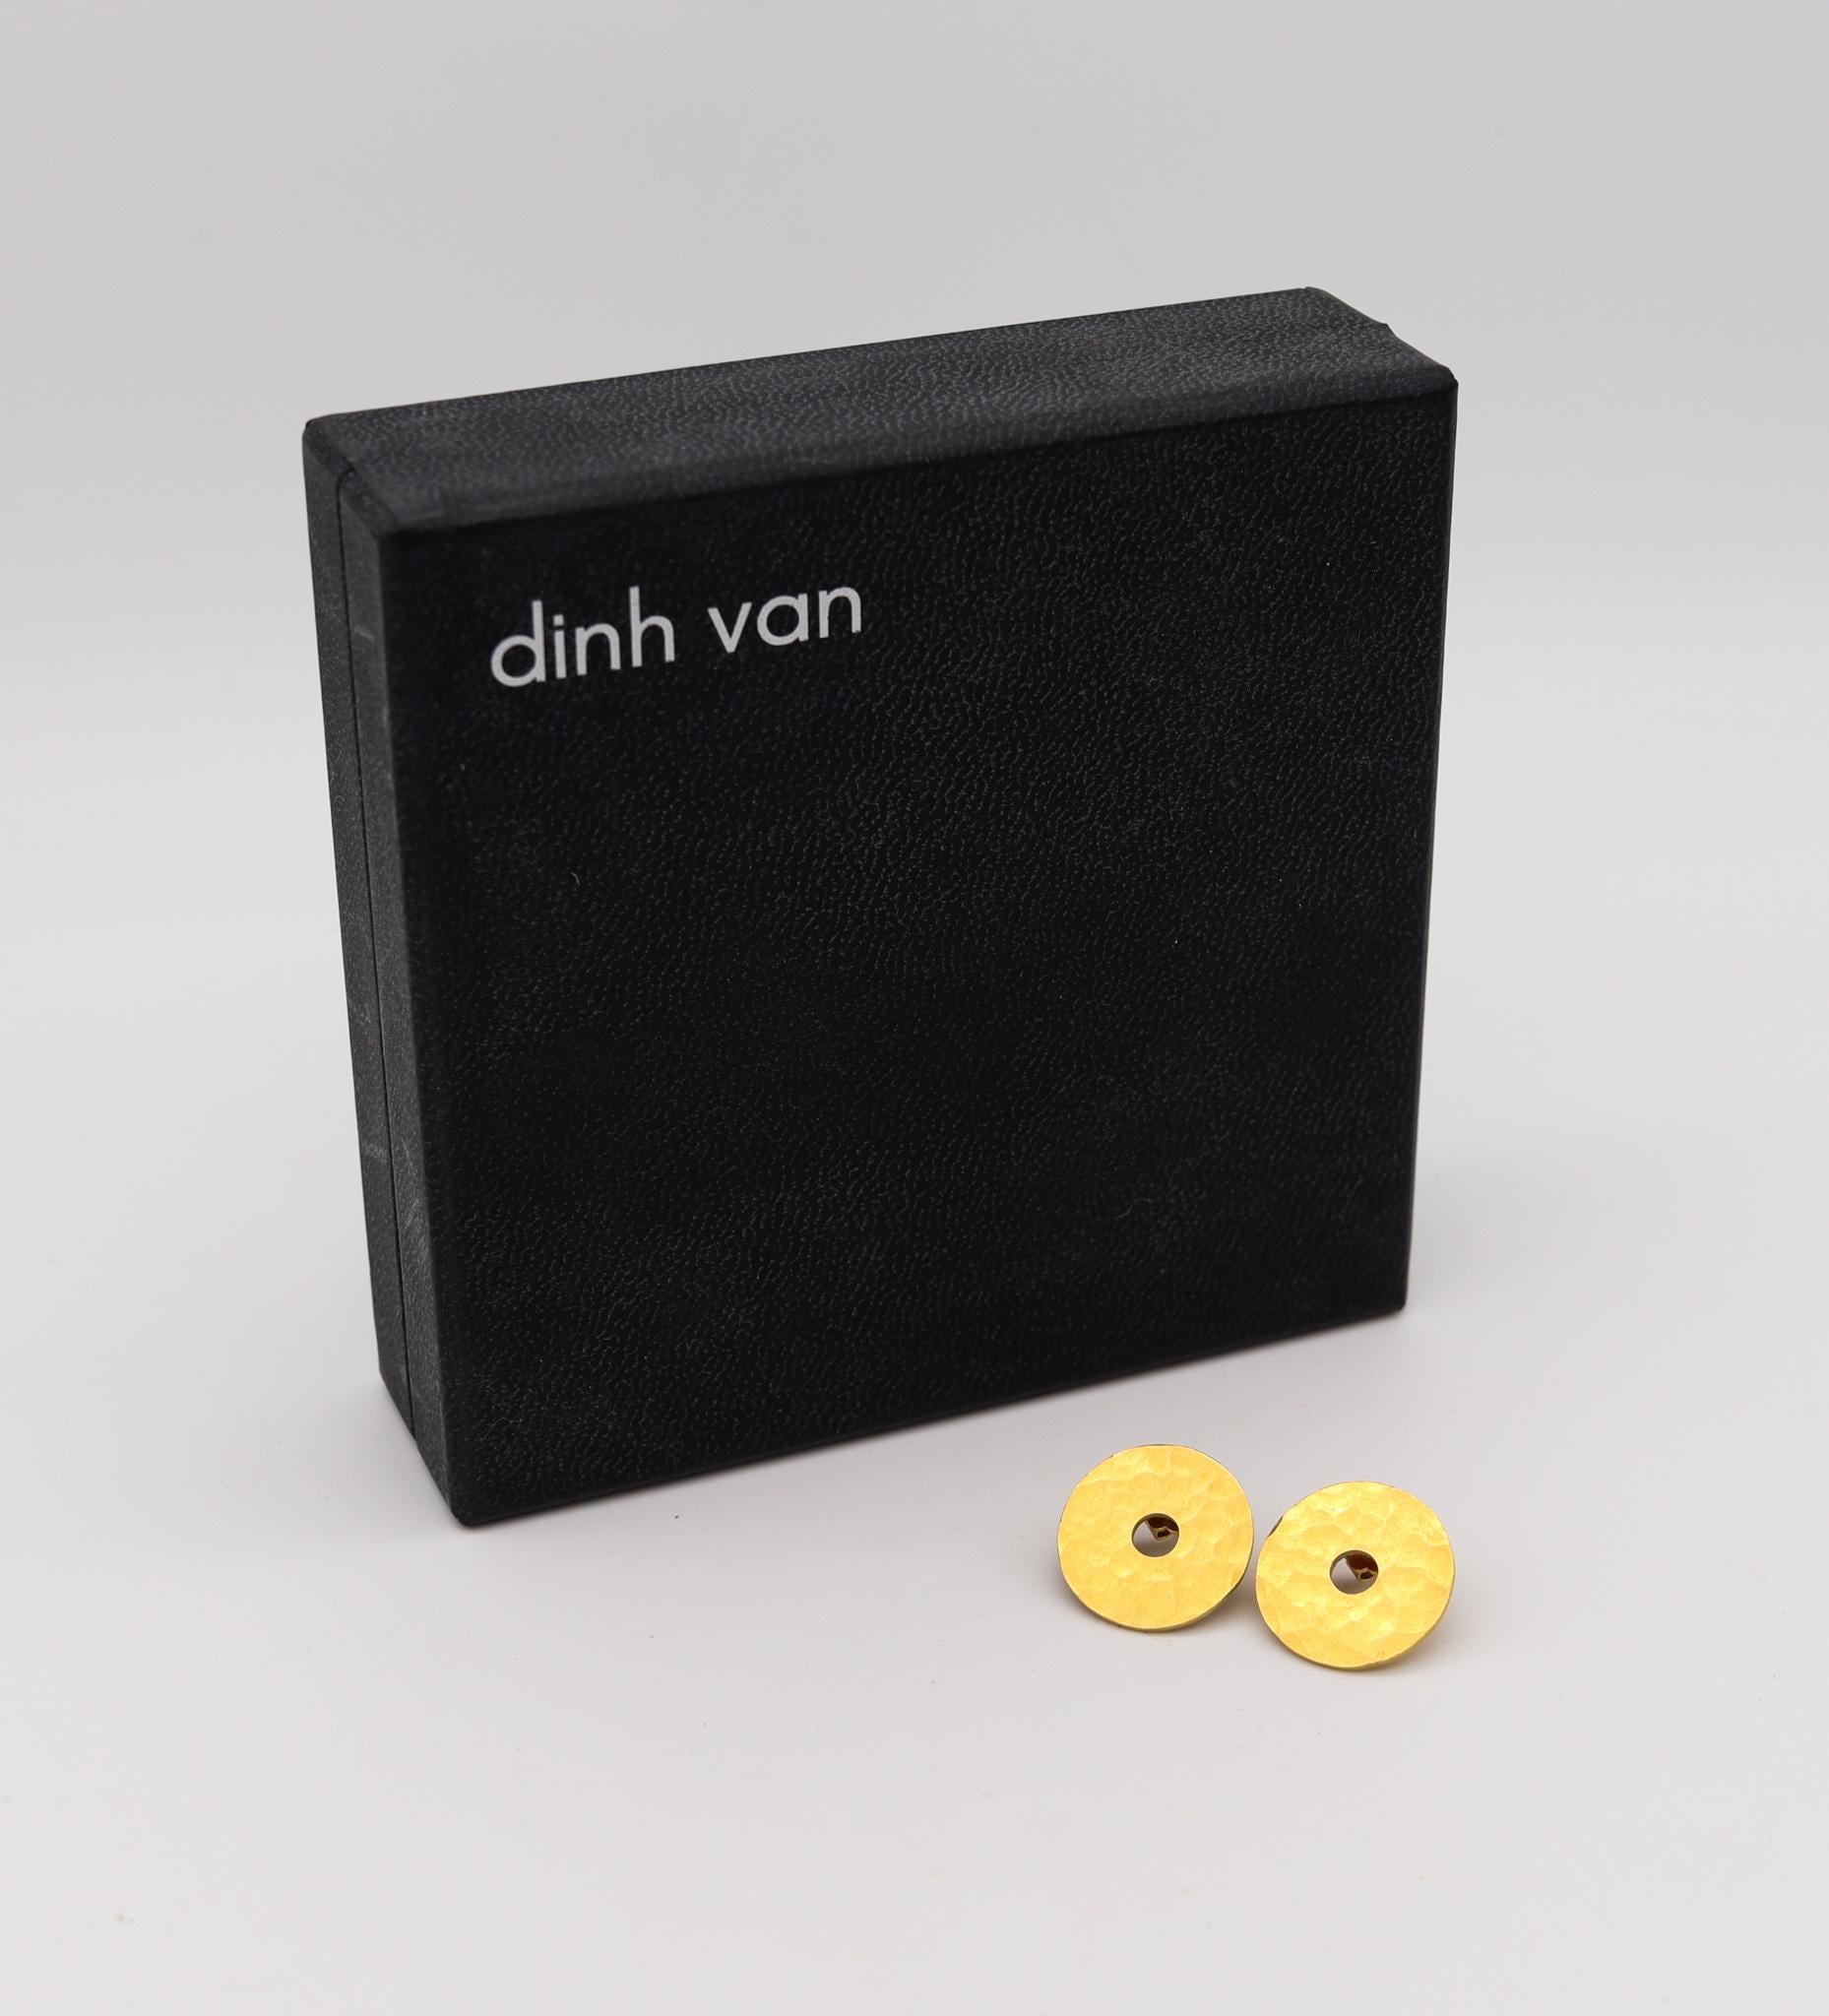 A geometric PI Chinois earrings designed by Jean Dinh Van.

Beautiful geometric circular pair, created in Paris, France at the jewelry atelier of the iconic designer Dinh Van. This pair of geometric studs earrings are from the PI CHINOIS collection